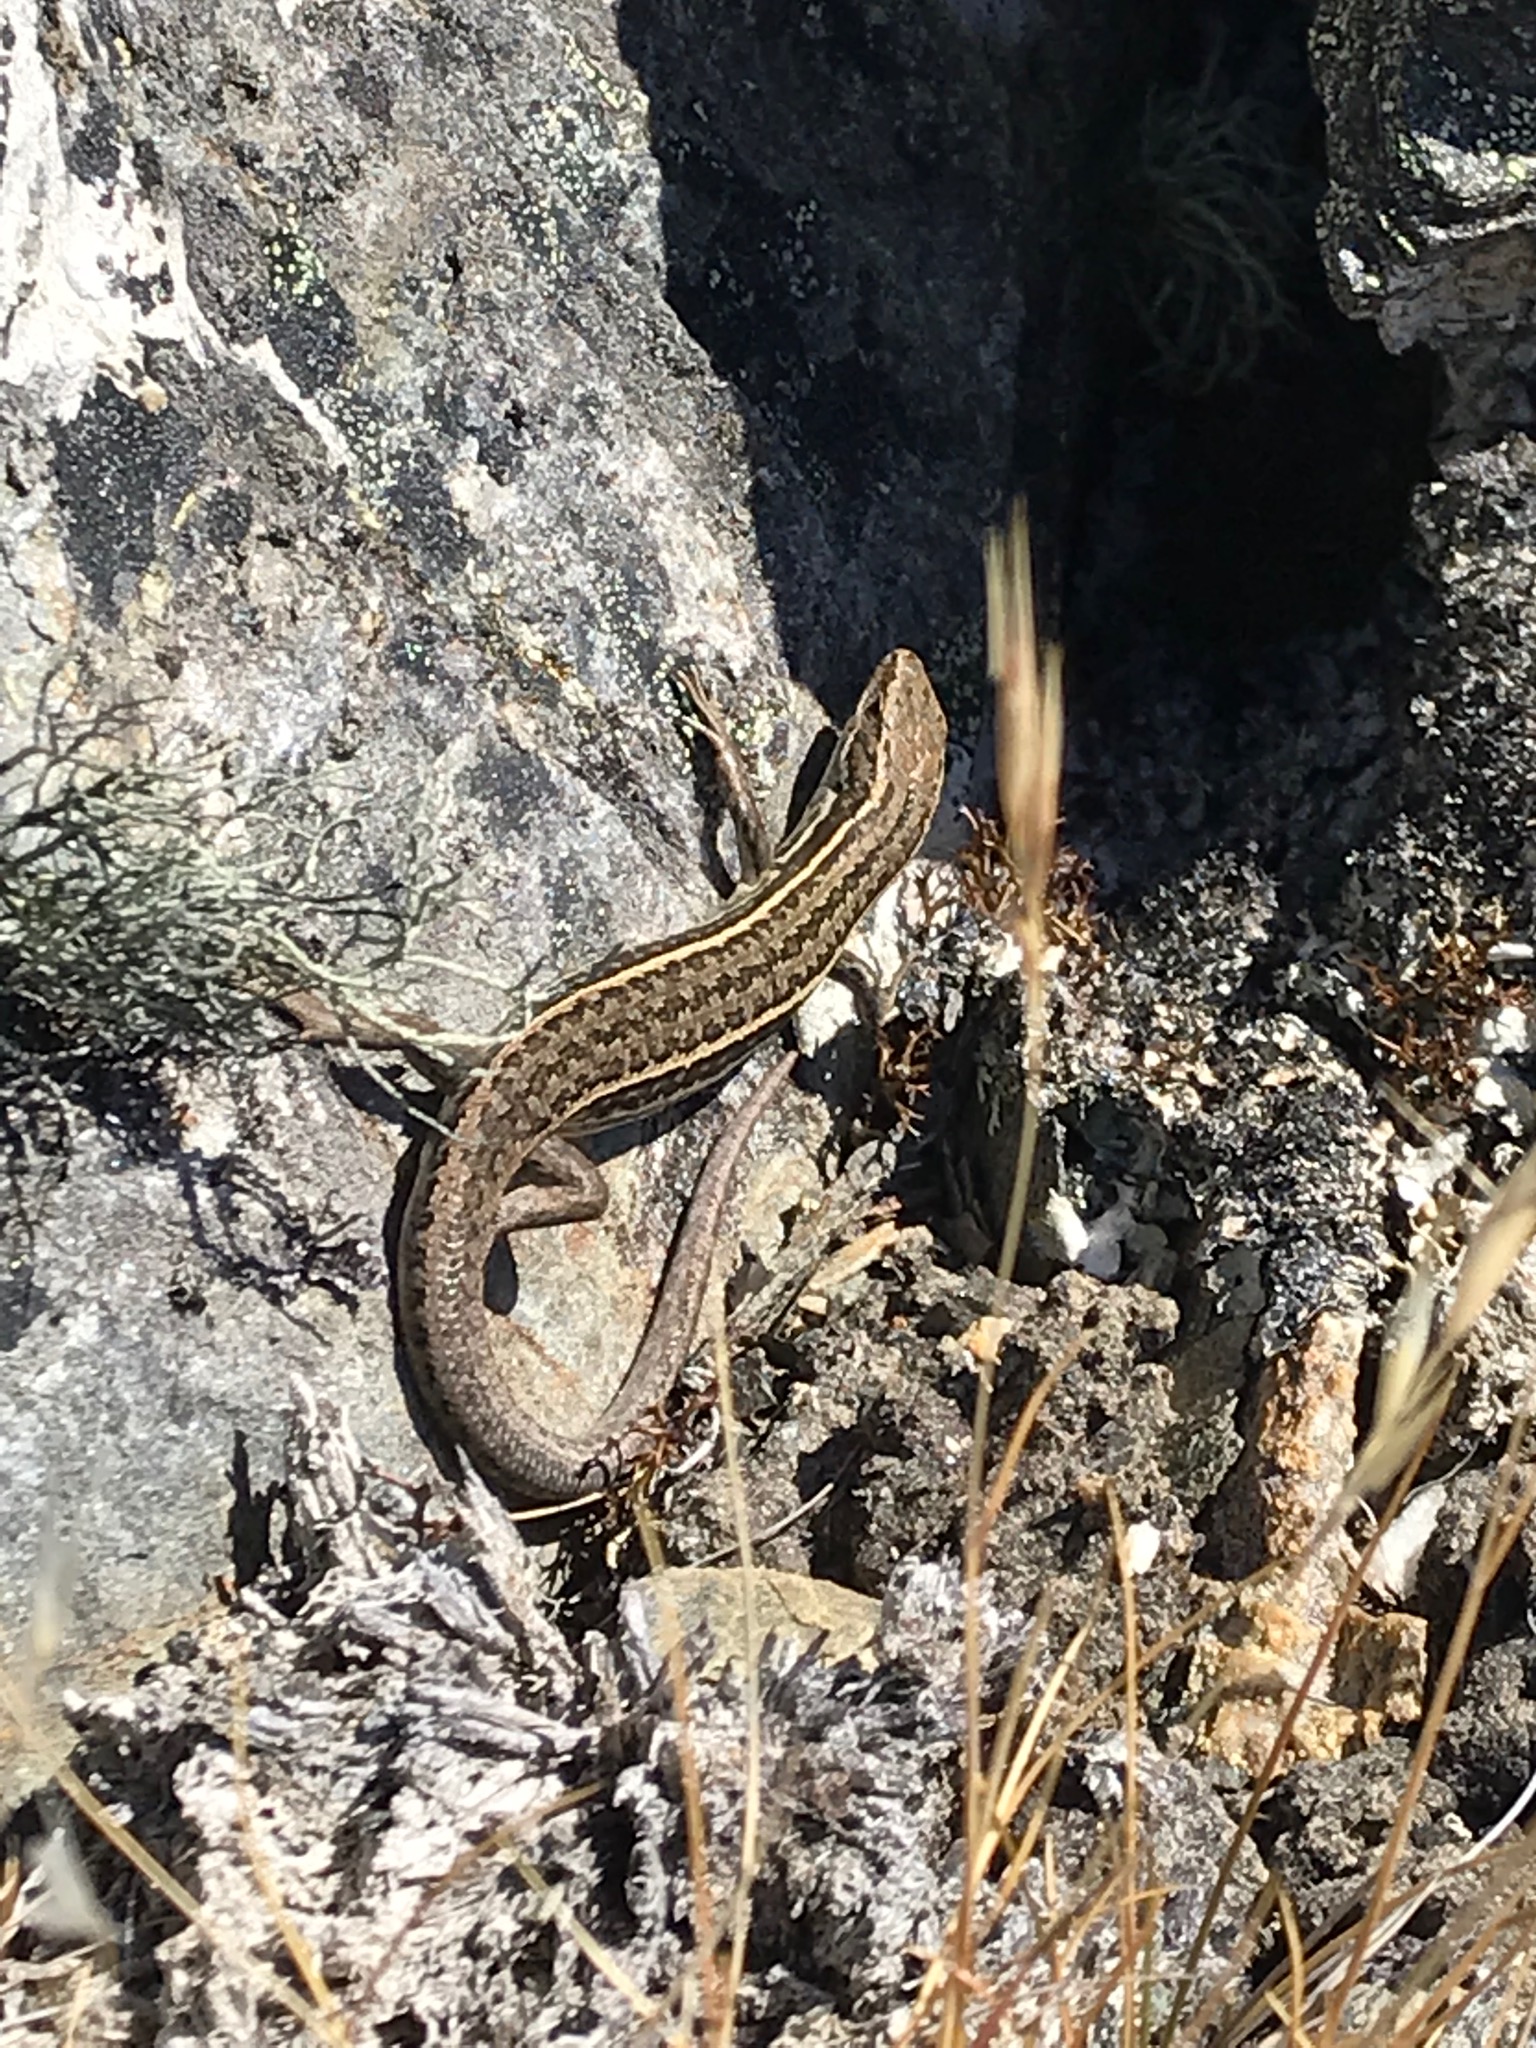 Native skink, probably a Common Skink (Oligosoma polychroma). Spotted in subalpine zone at about 1000m above sea level on the way down from Isthmus Peak.